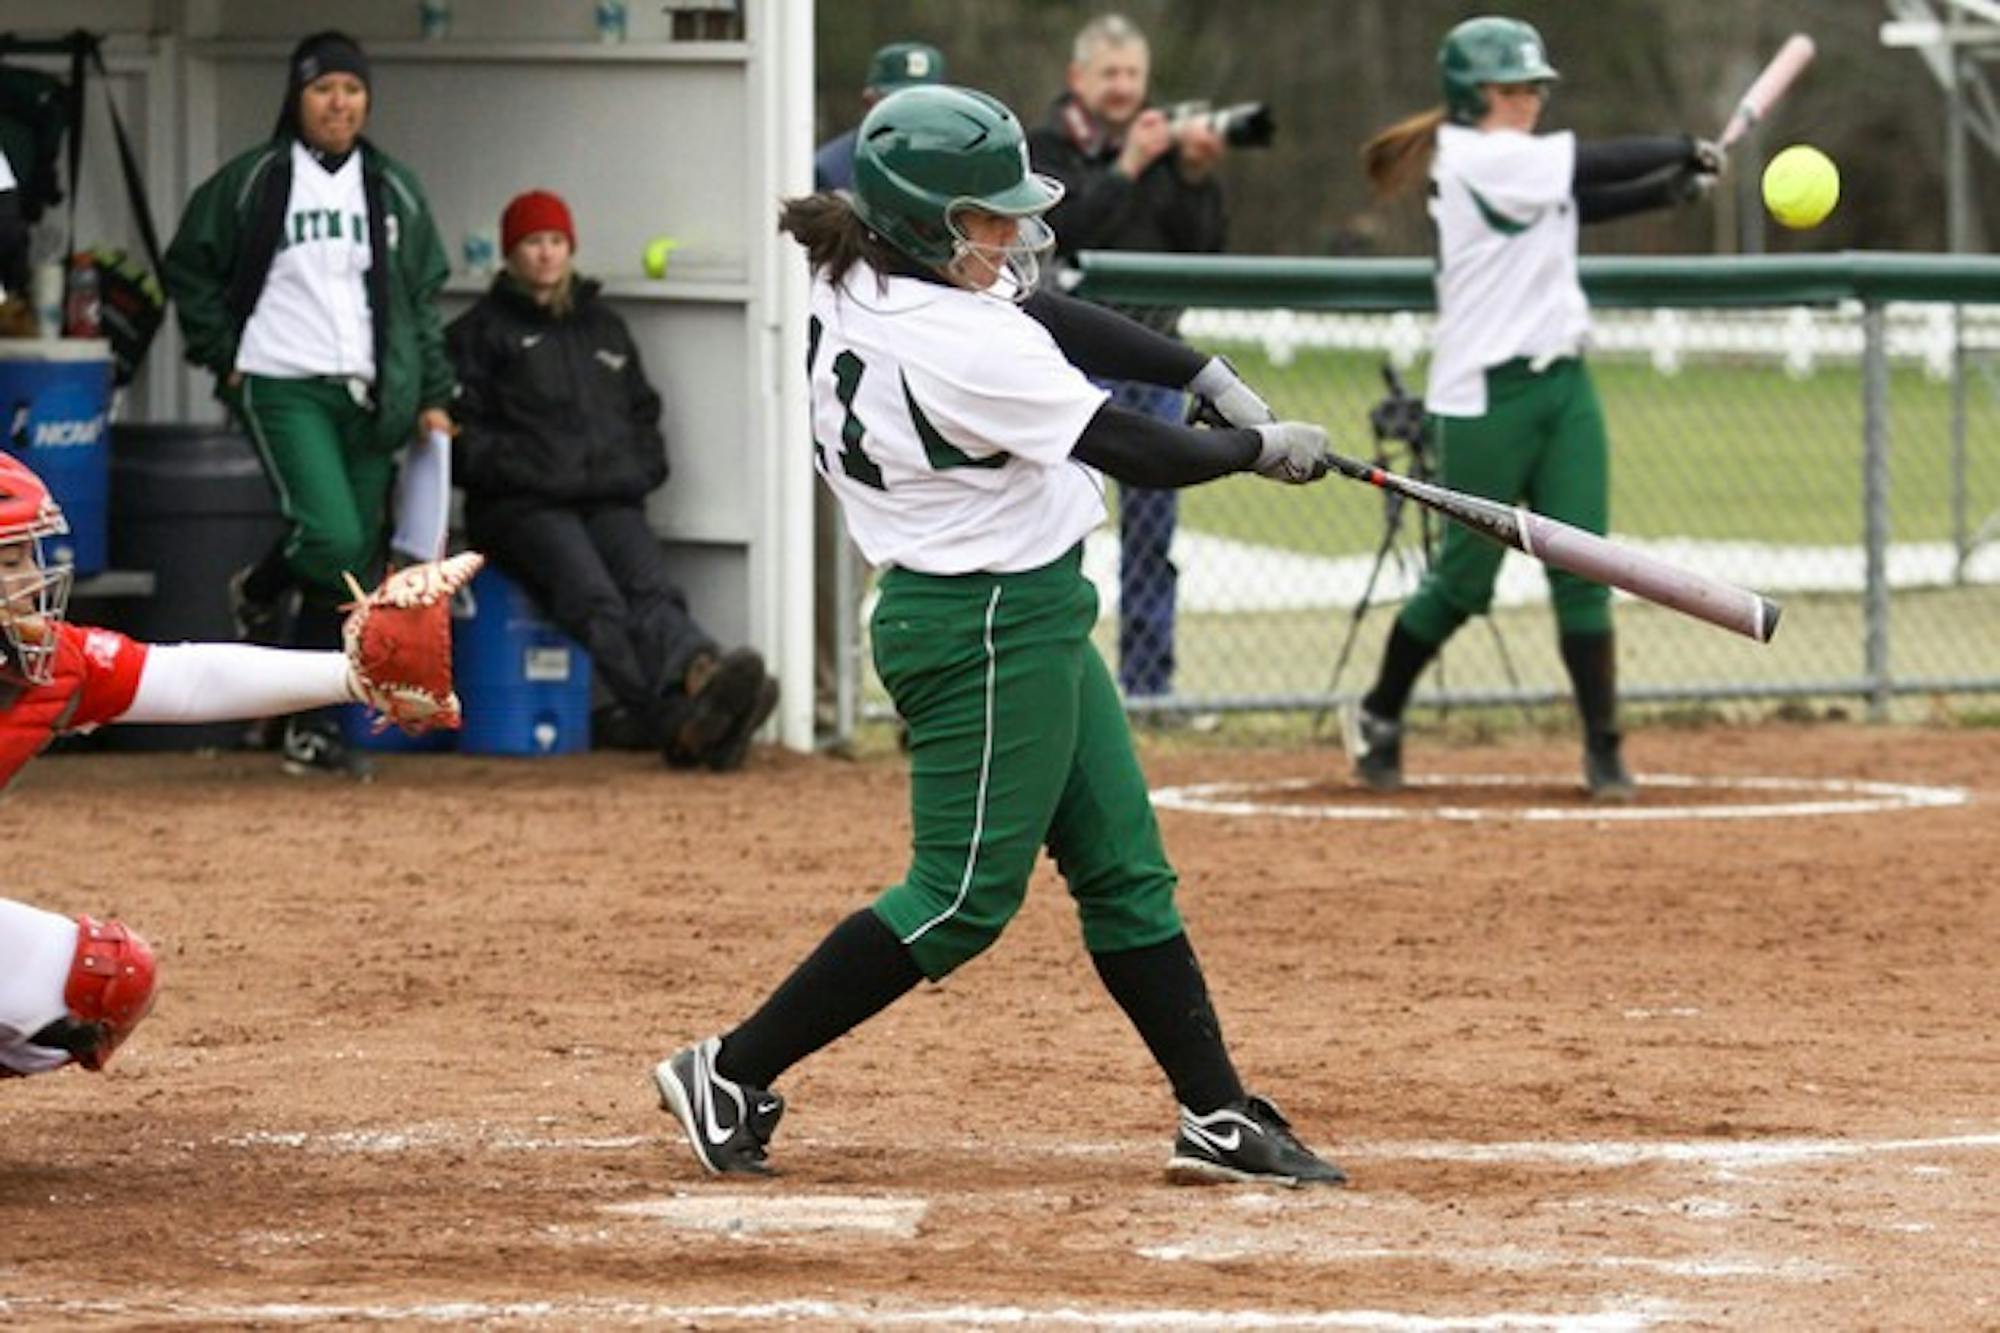 Powered by an explosive offense, the Big Green softball team swept Sacred Heart in a doubleheader, 8-5 and 9-1.